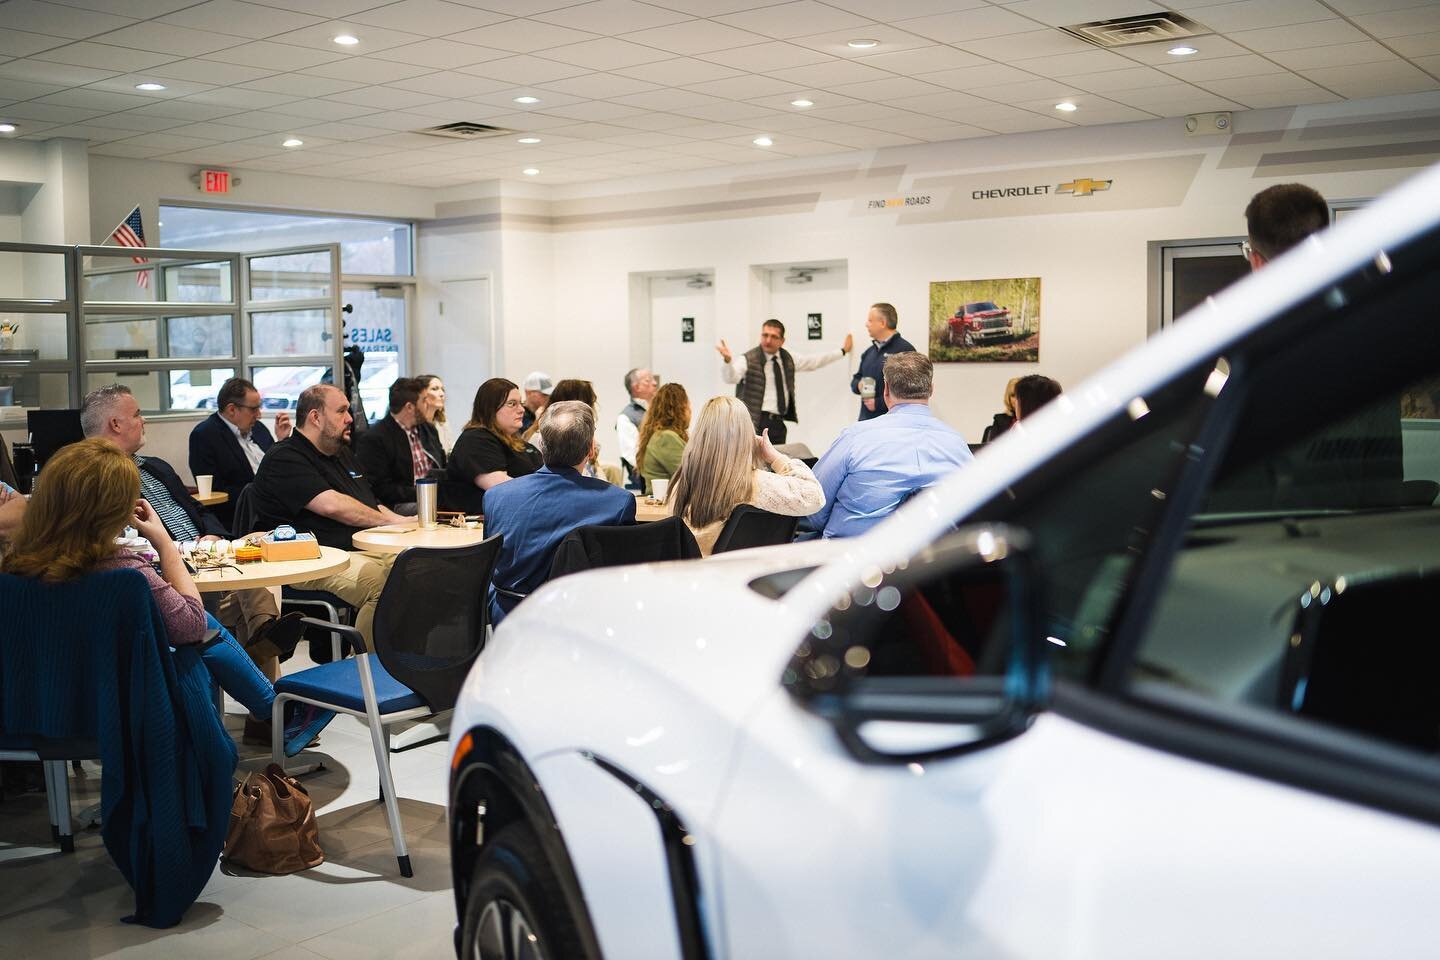 Another fantastic Coffee Club session hosted at @troyalanchevrolet in Slippery Rock, PA! We&rsquo;re grateful for their hospitality and for enlightening us on the future of EV&rsquo;s. Troy-Alan Chevrolet, a family-owned business since 1993, offers t